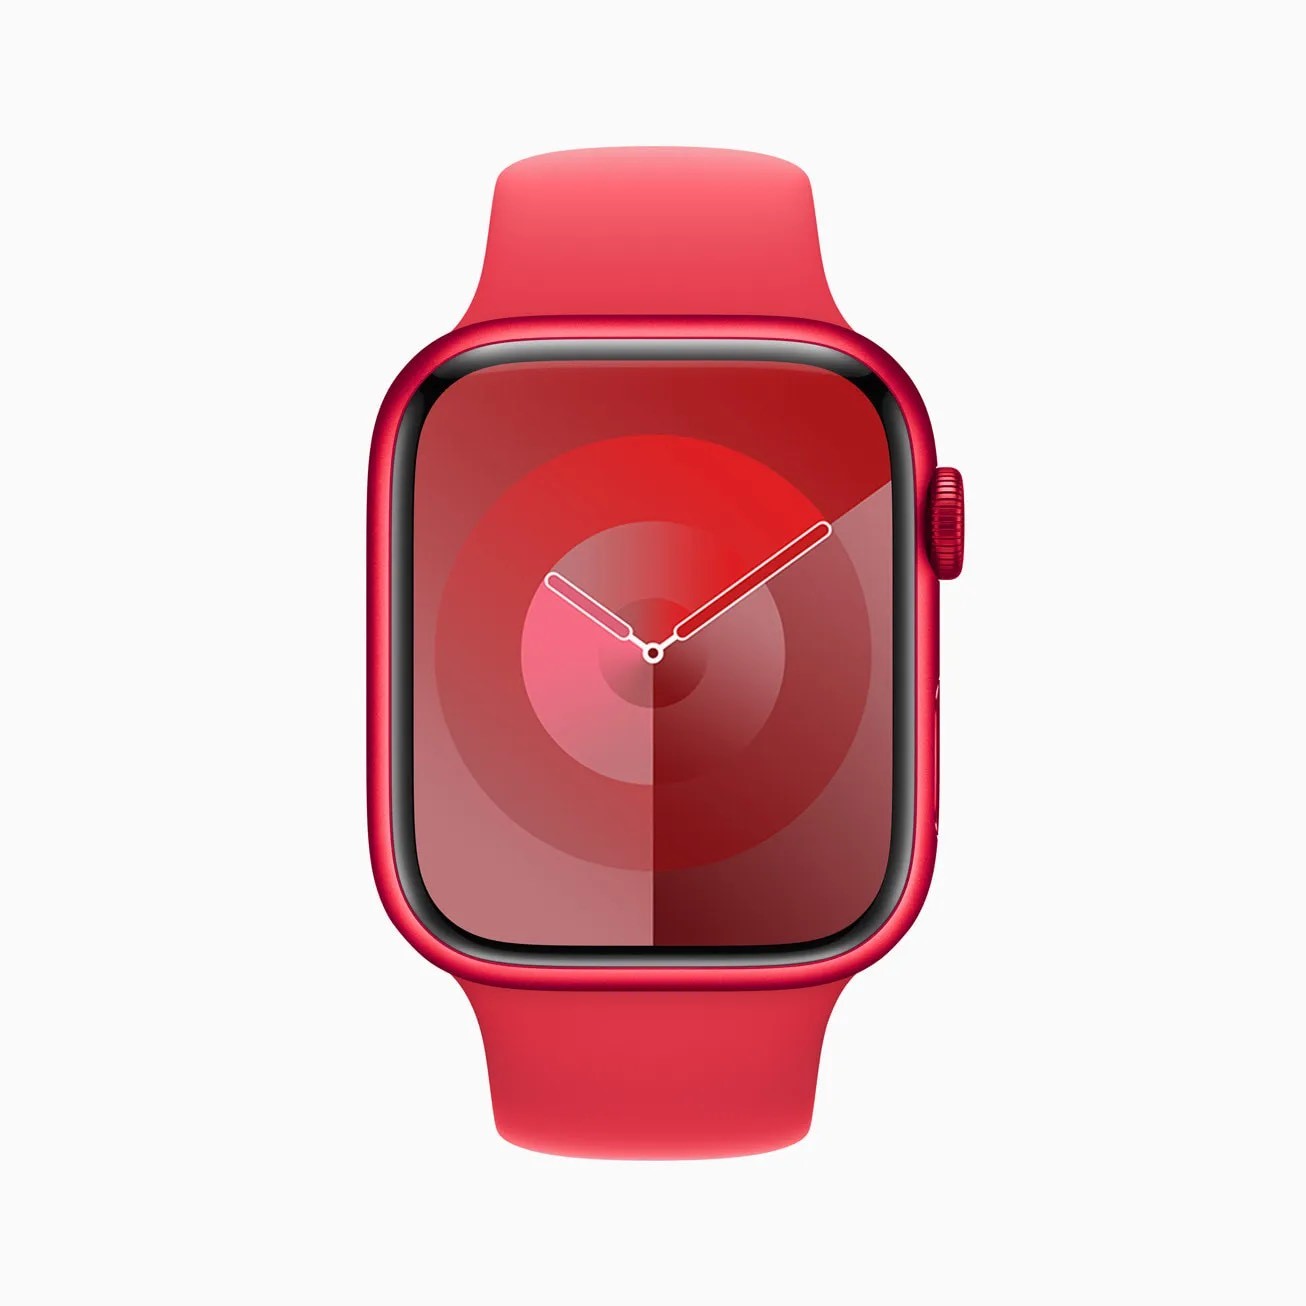 Apple Watch Series 9 (PRODUCT)RED: Have the Specs Changed?